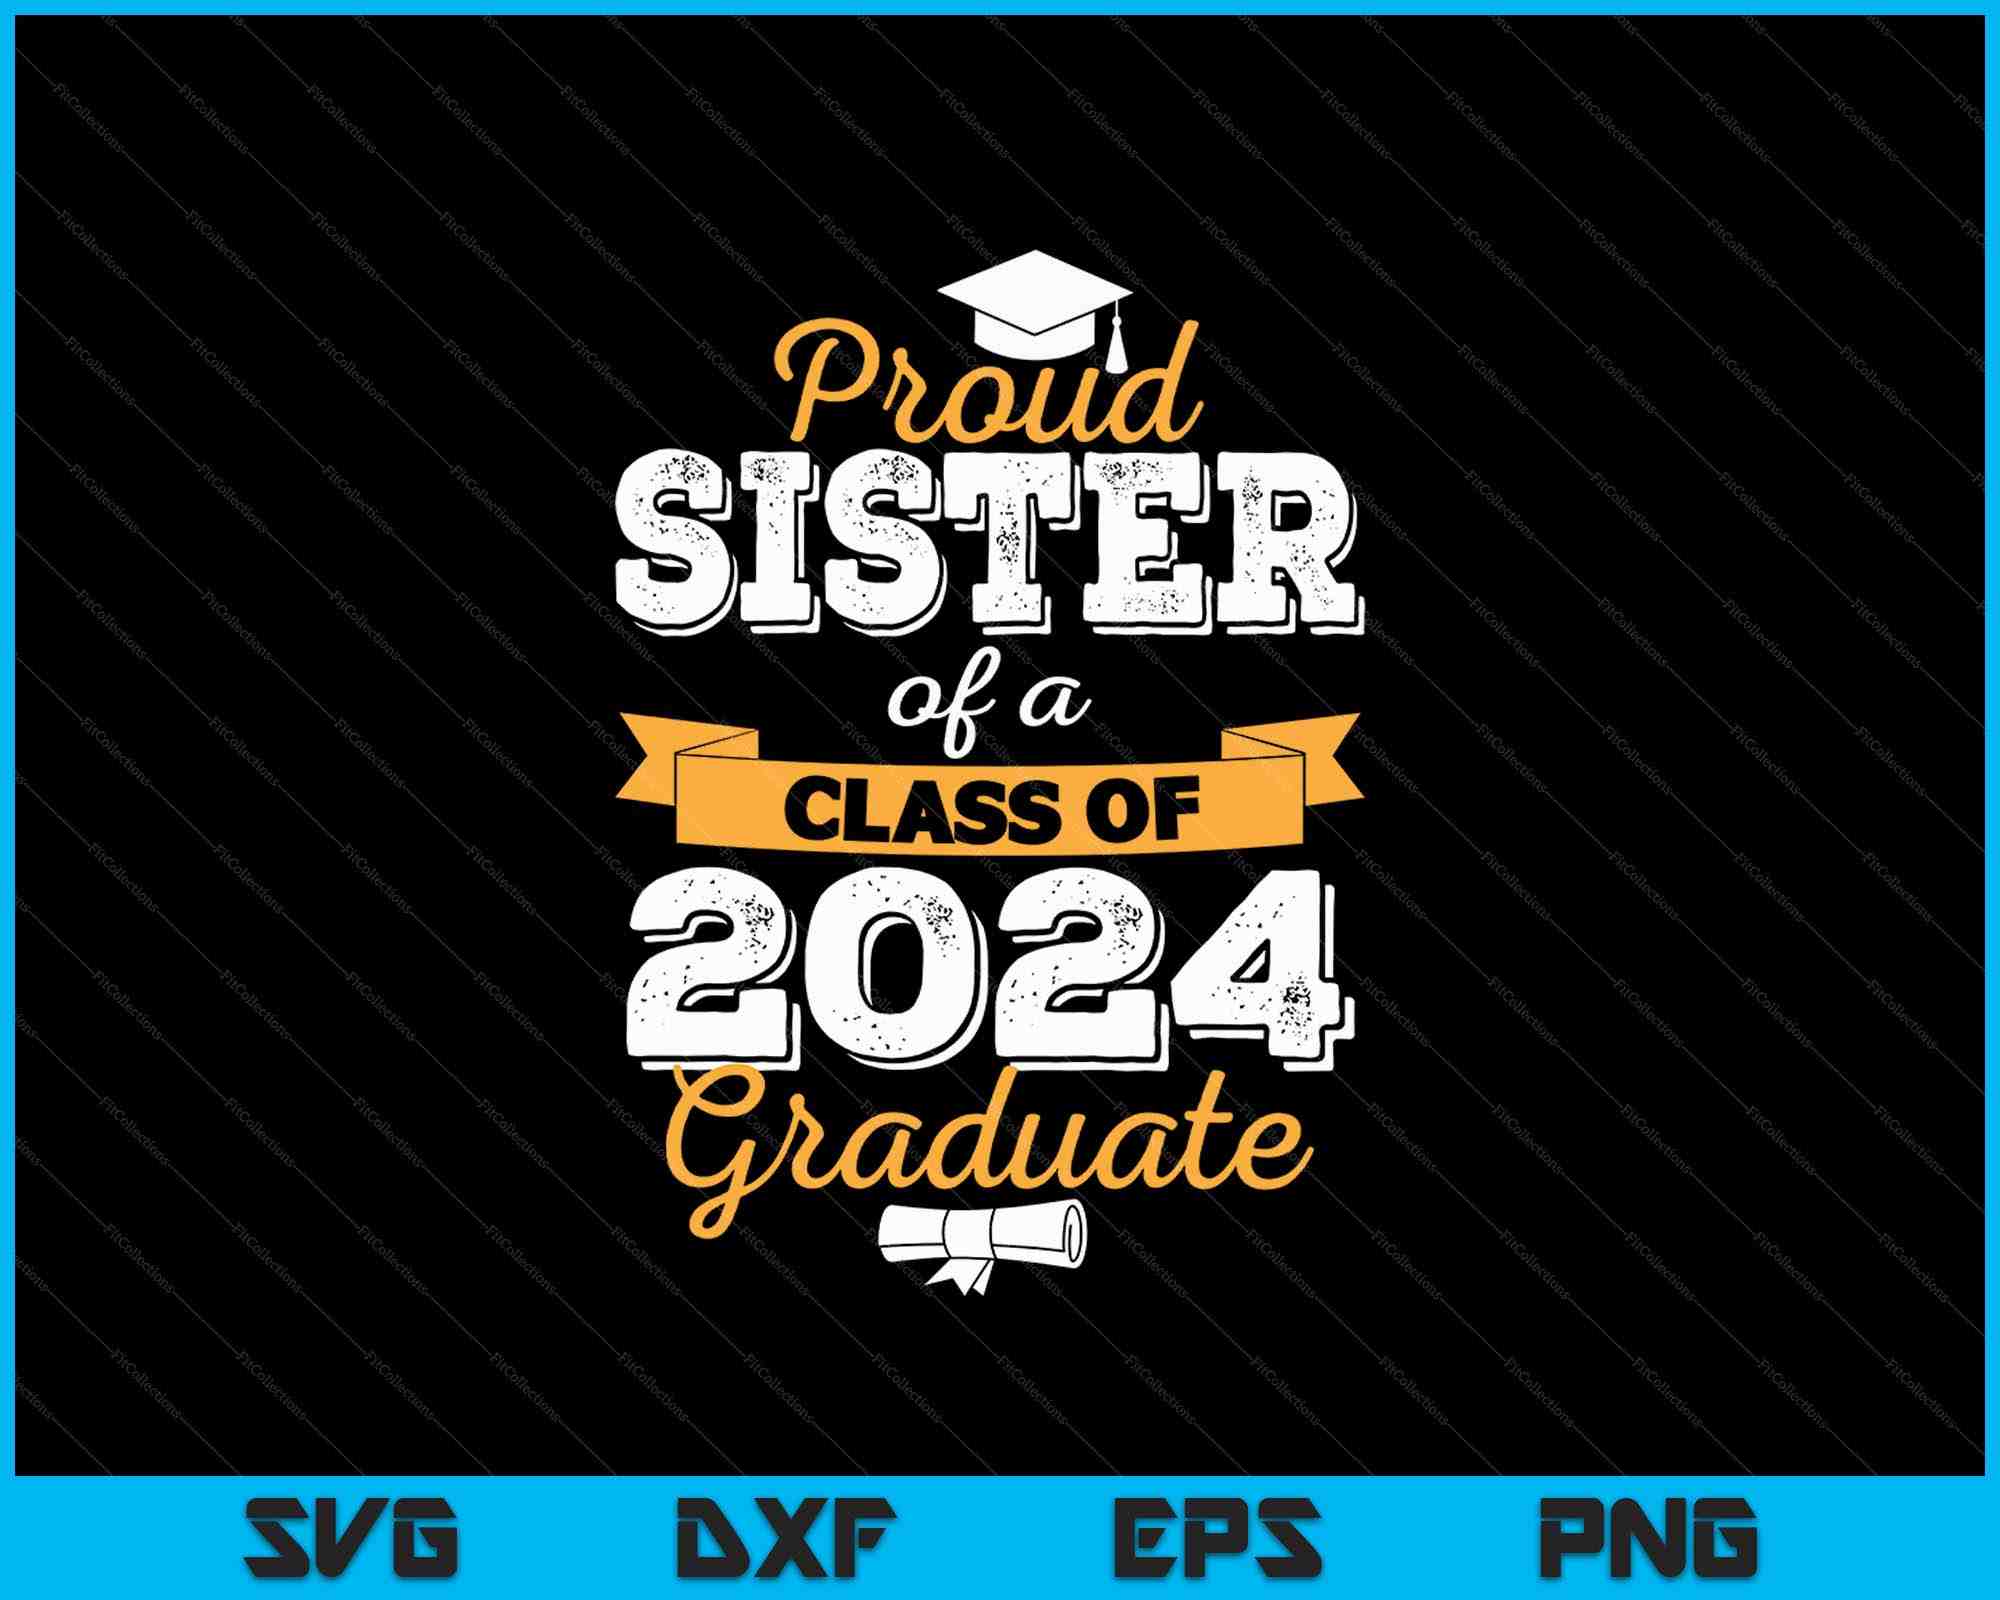 Proud Sister of a Class of 2024 Graduate SVG PNG Cutting Files